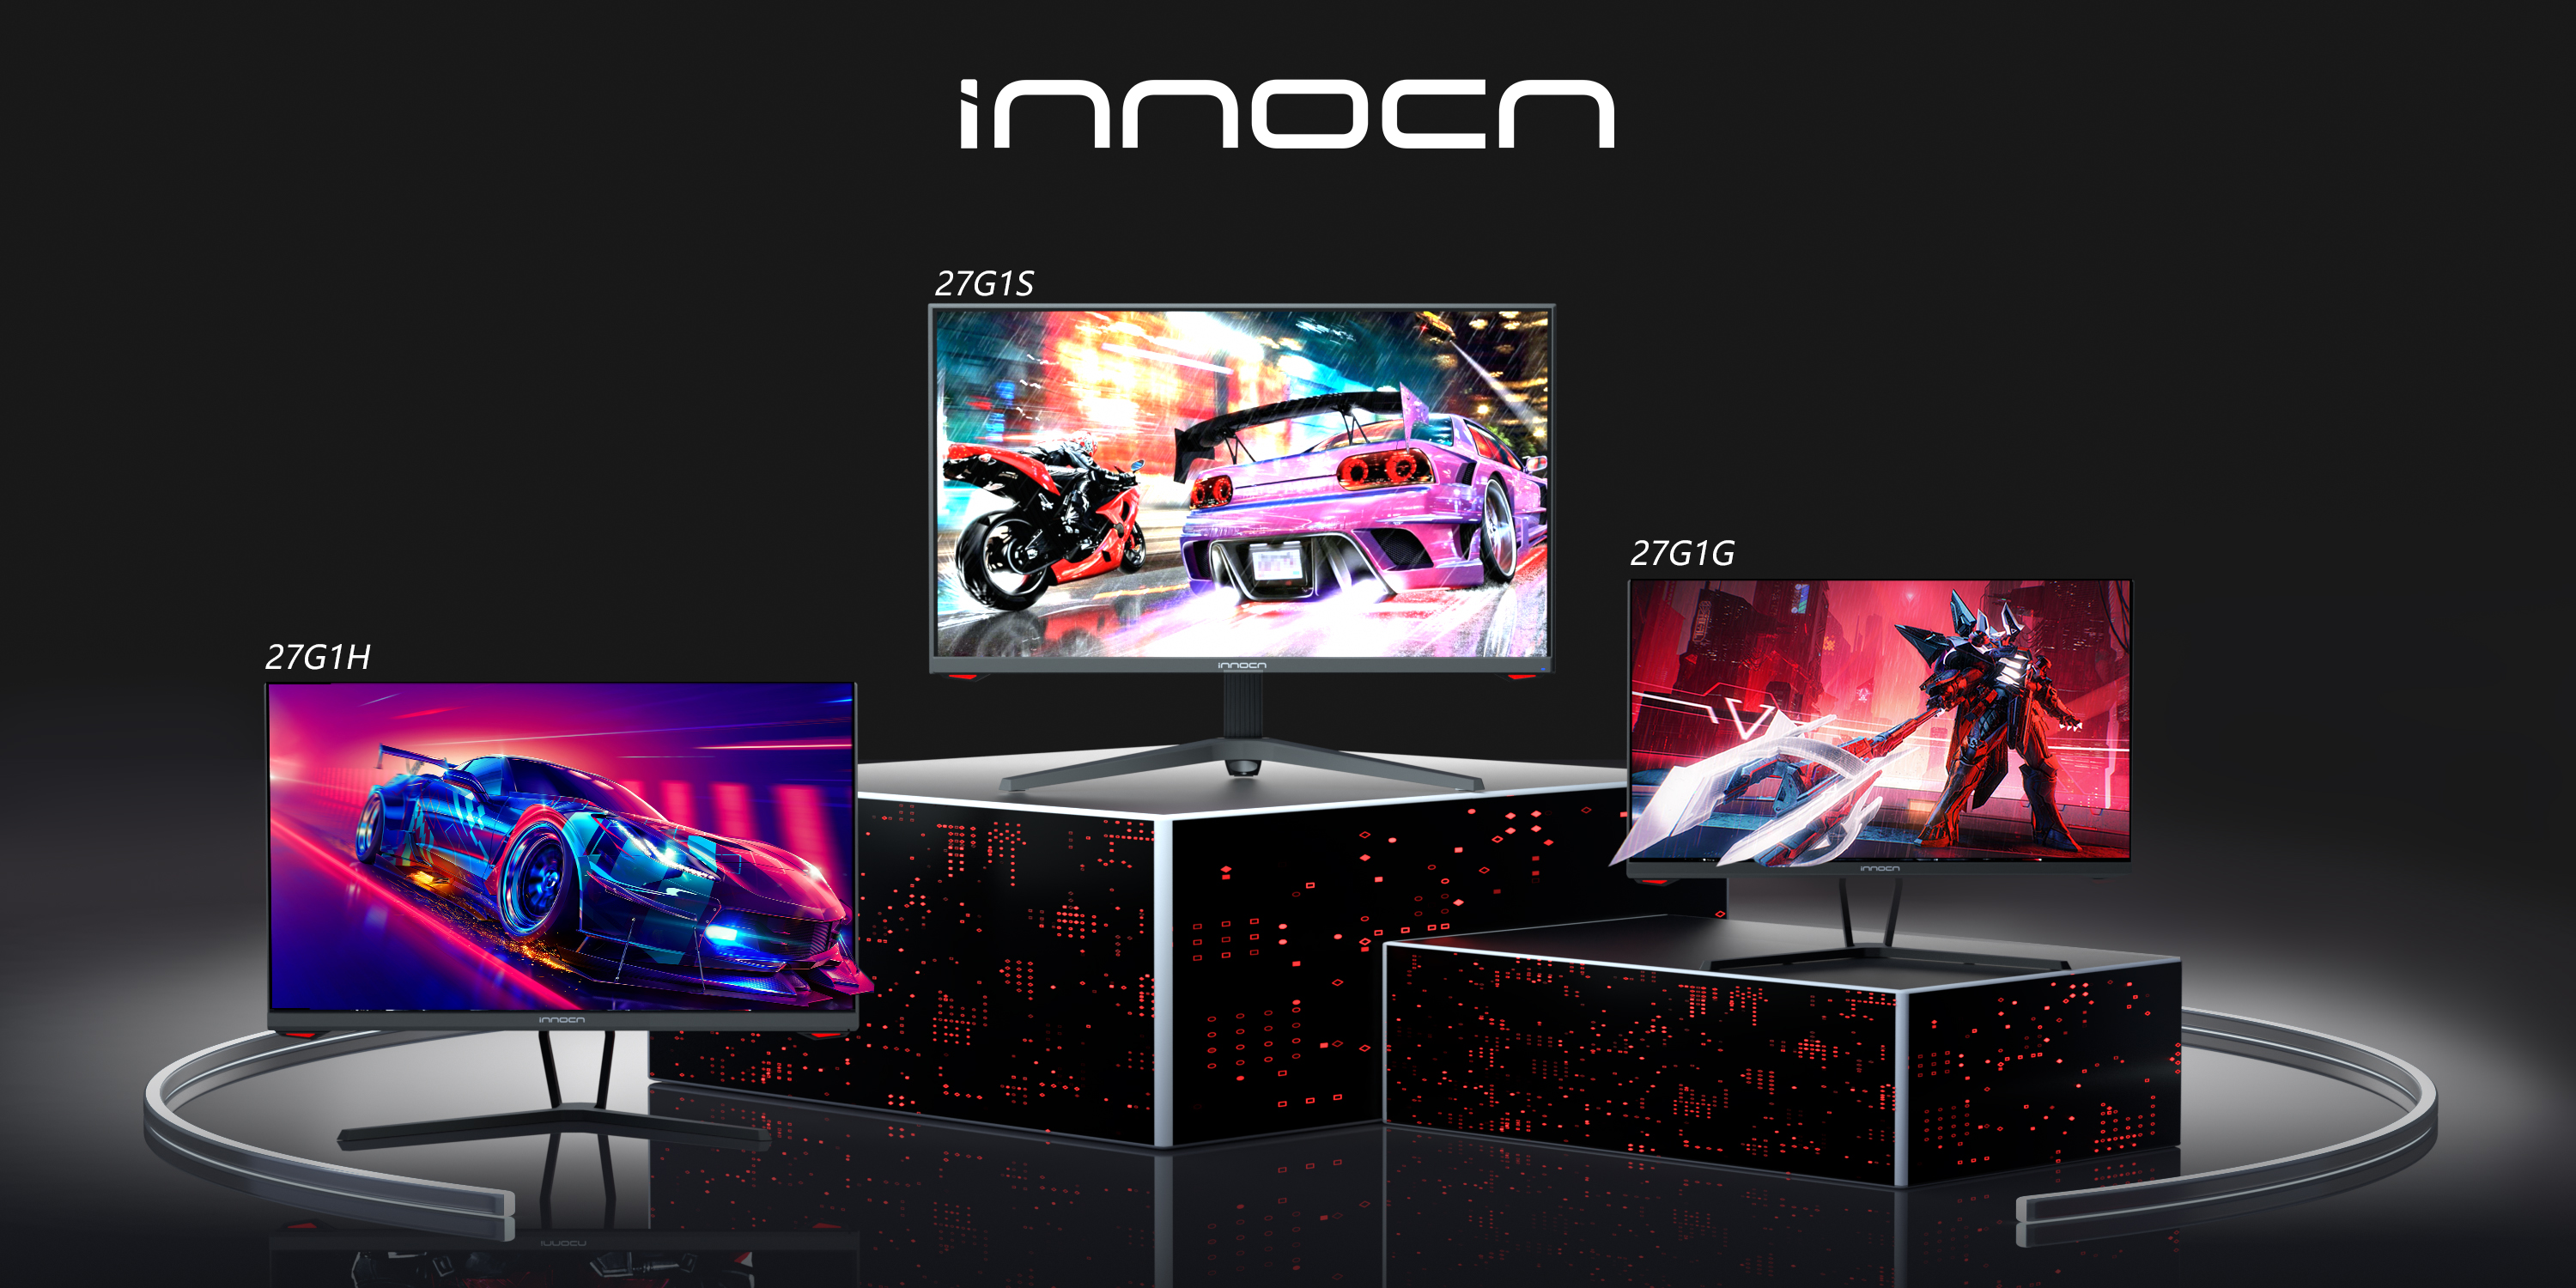 INNOCN Has Prime Day Deals Offers on Computer Monitors